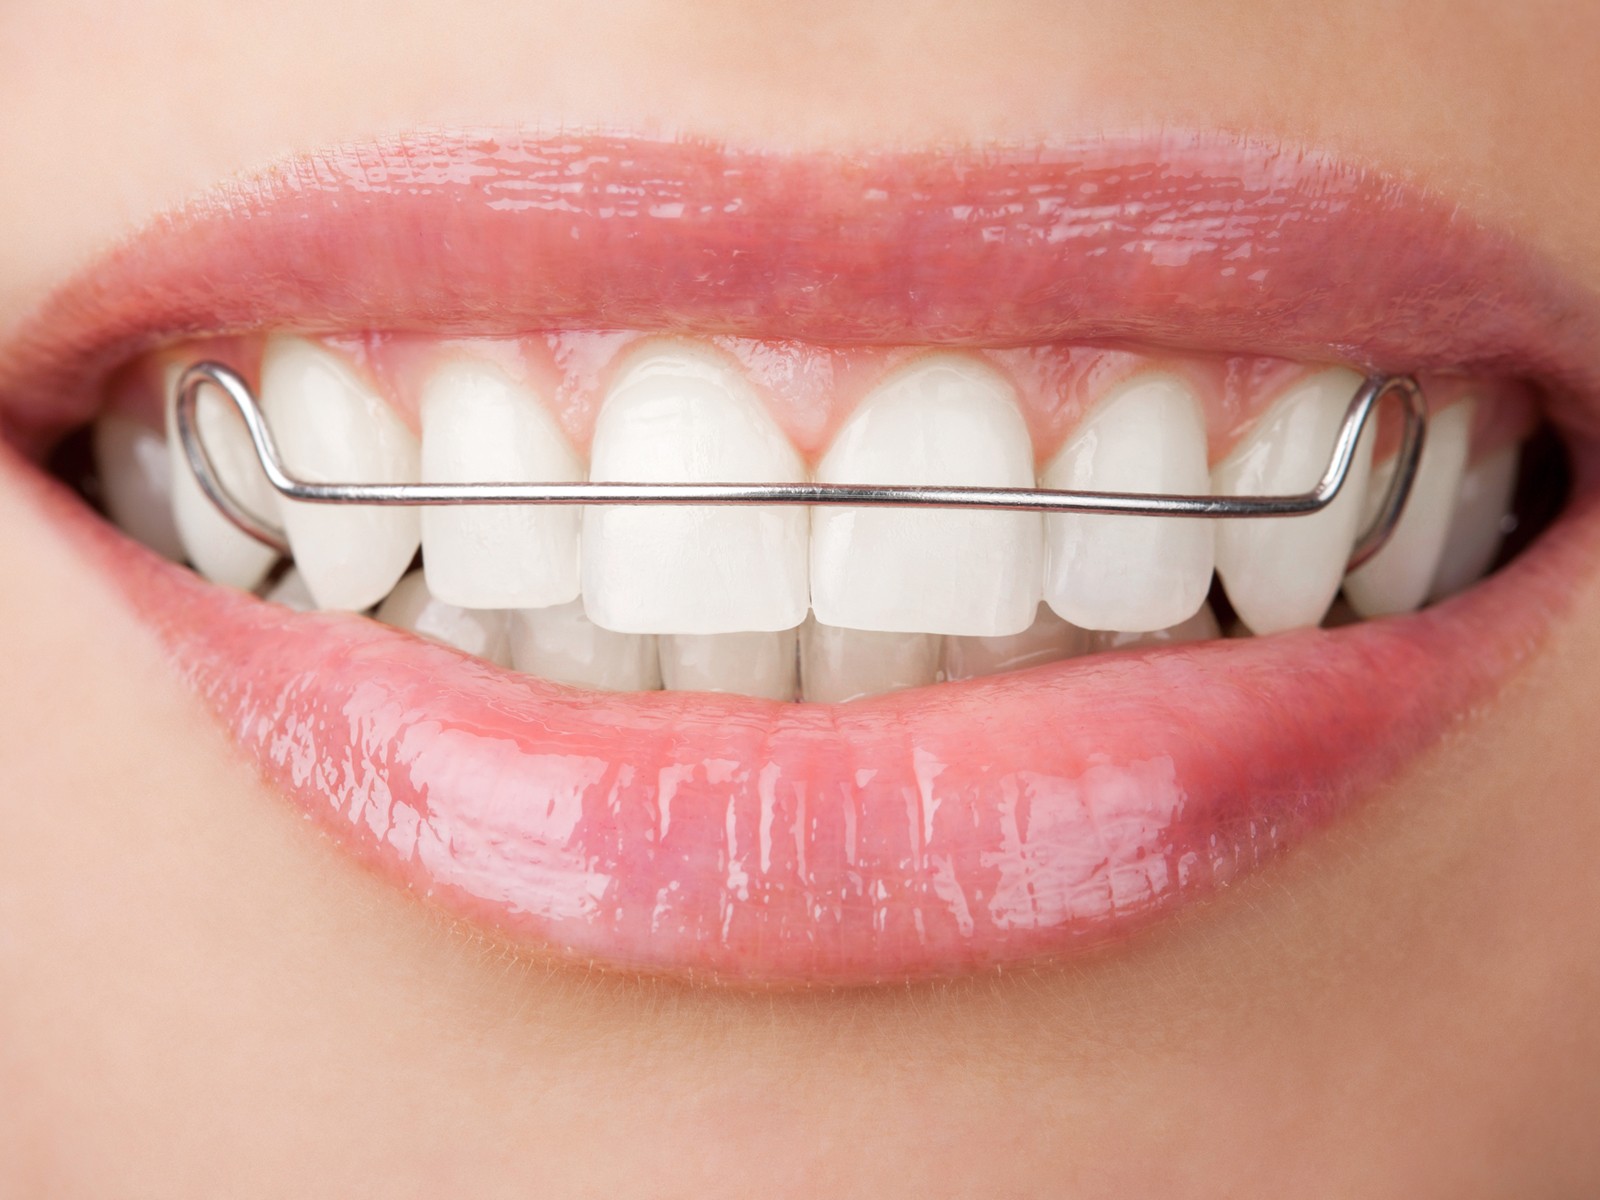 Can retainers damage teeth?